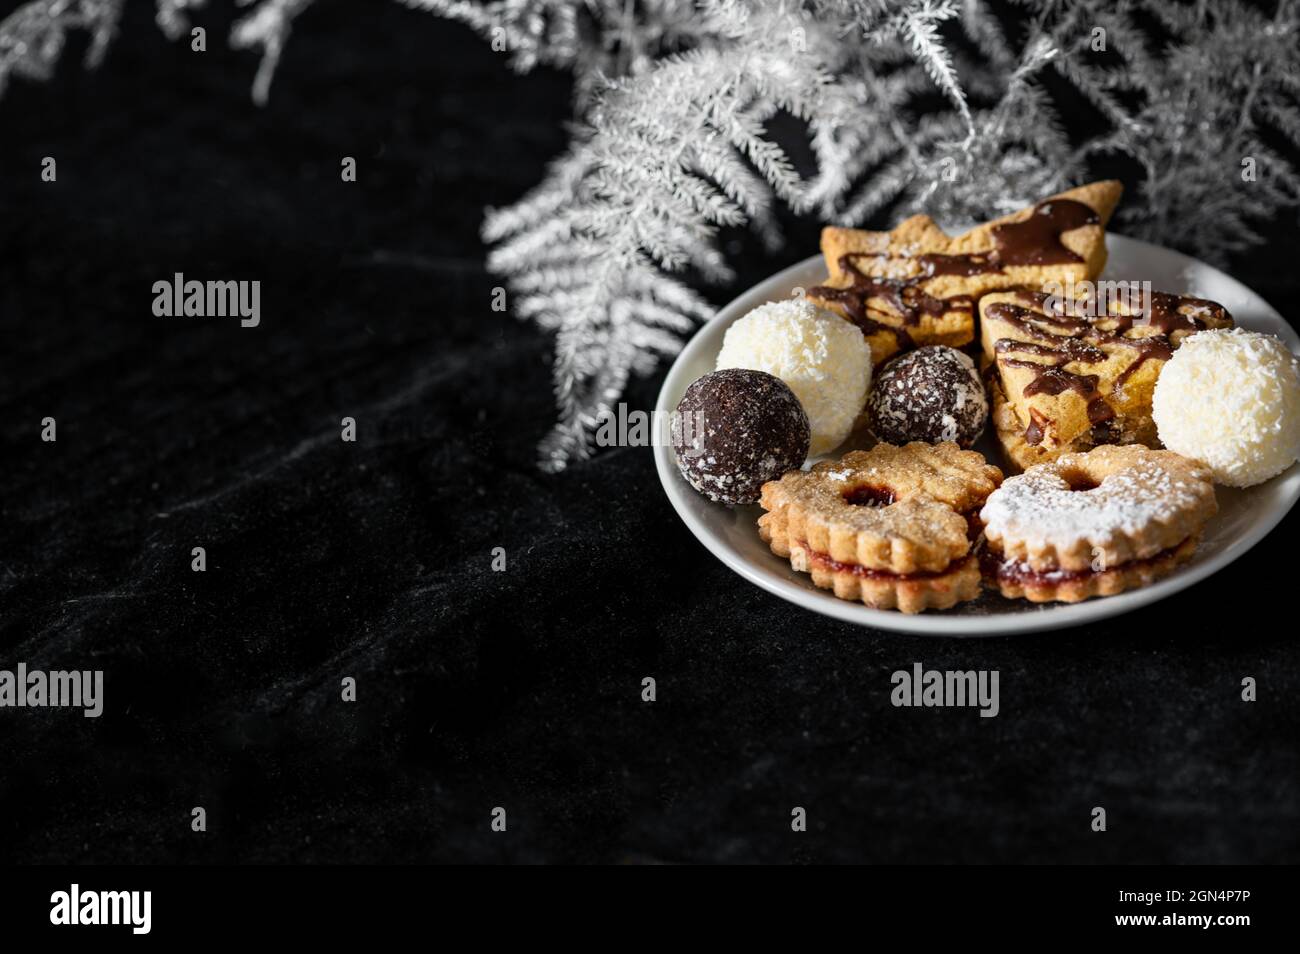 Pile of christmas cookies on white plate on black velvet background with white bracken twig. Stock Photo